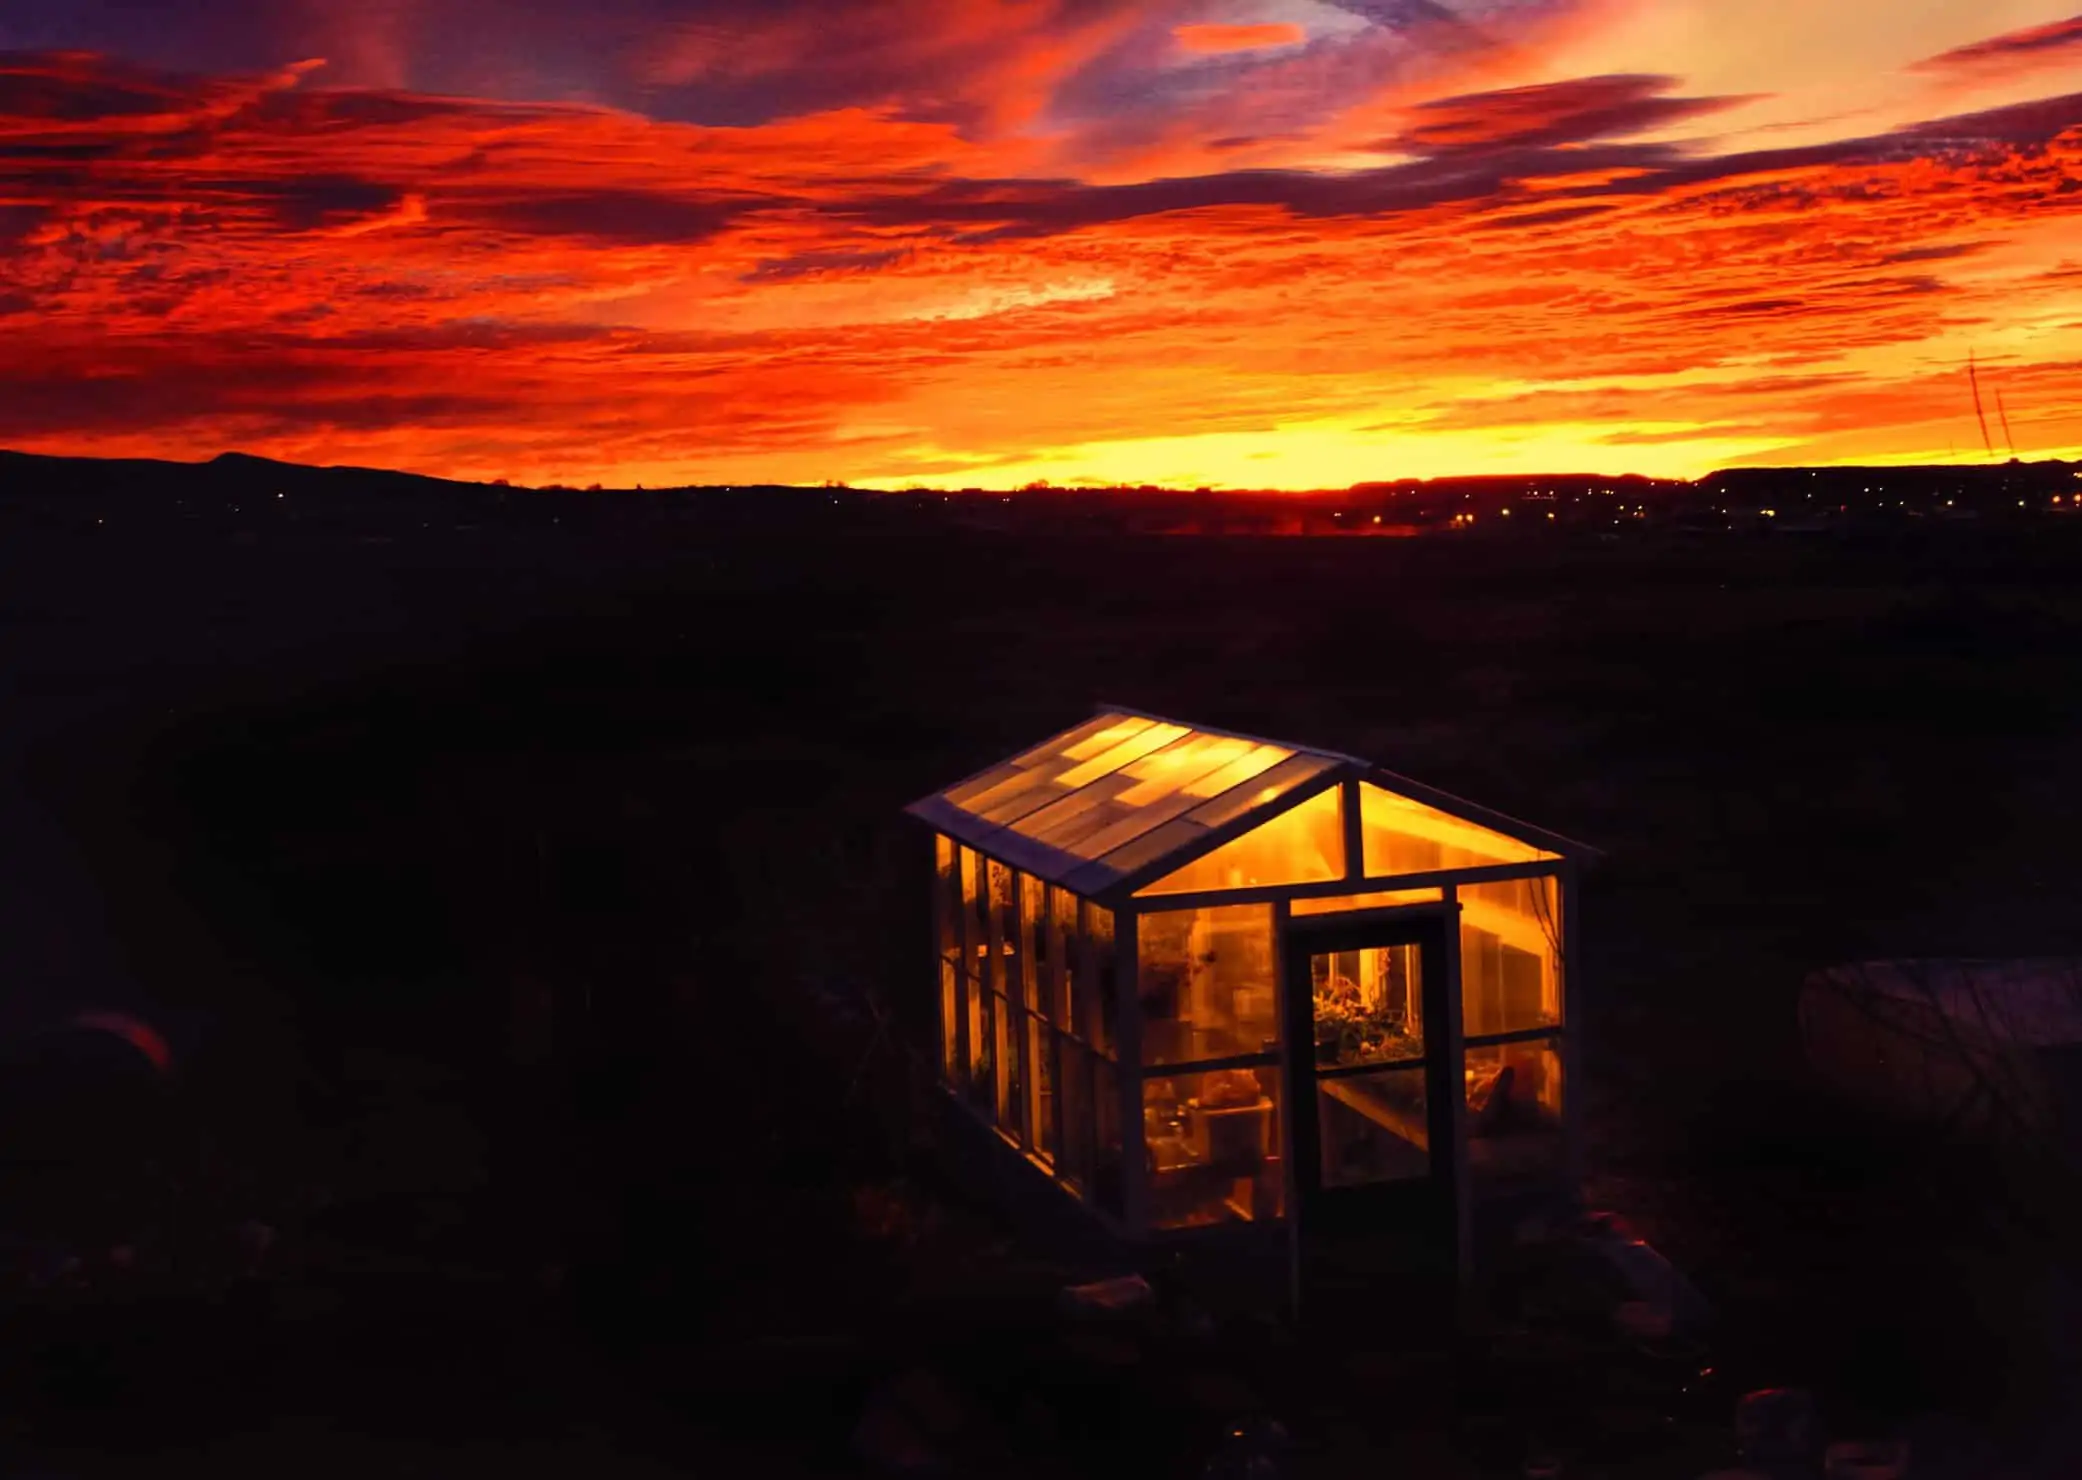 Ideal marijuana lighting for your winter grow. Cabin with colorful sky.